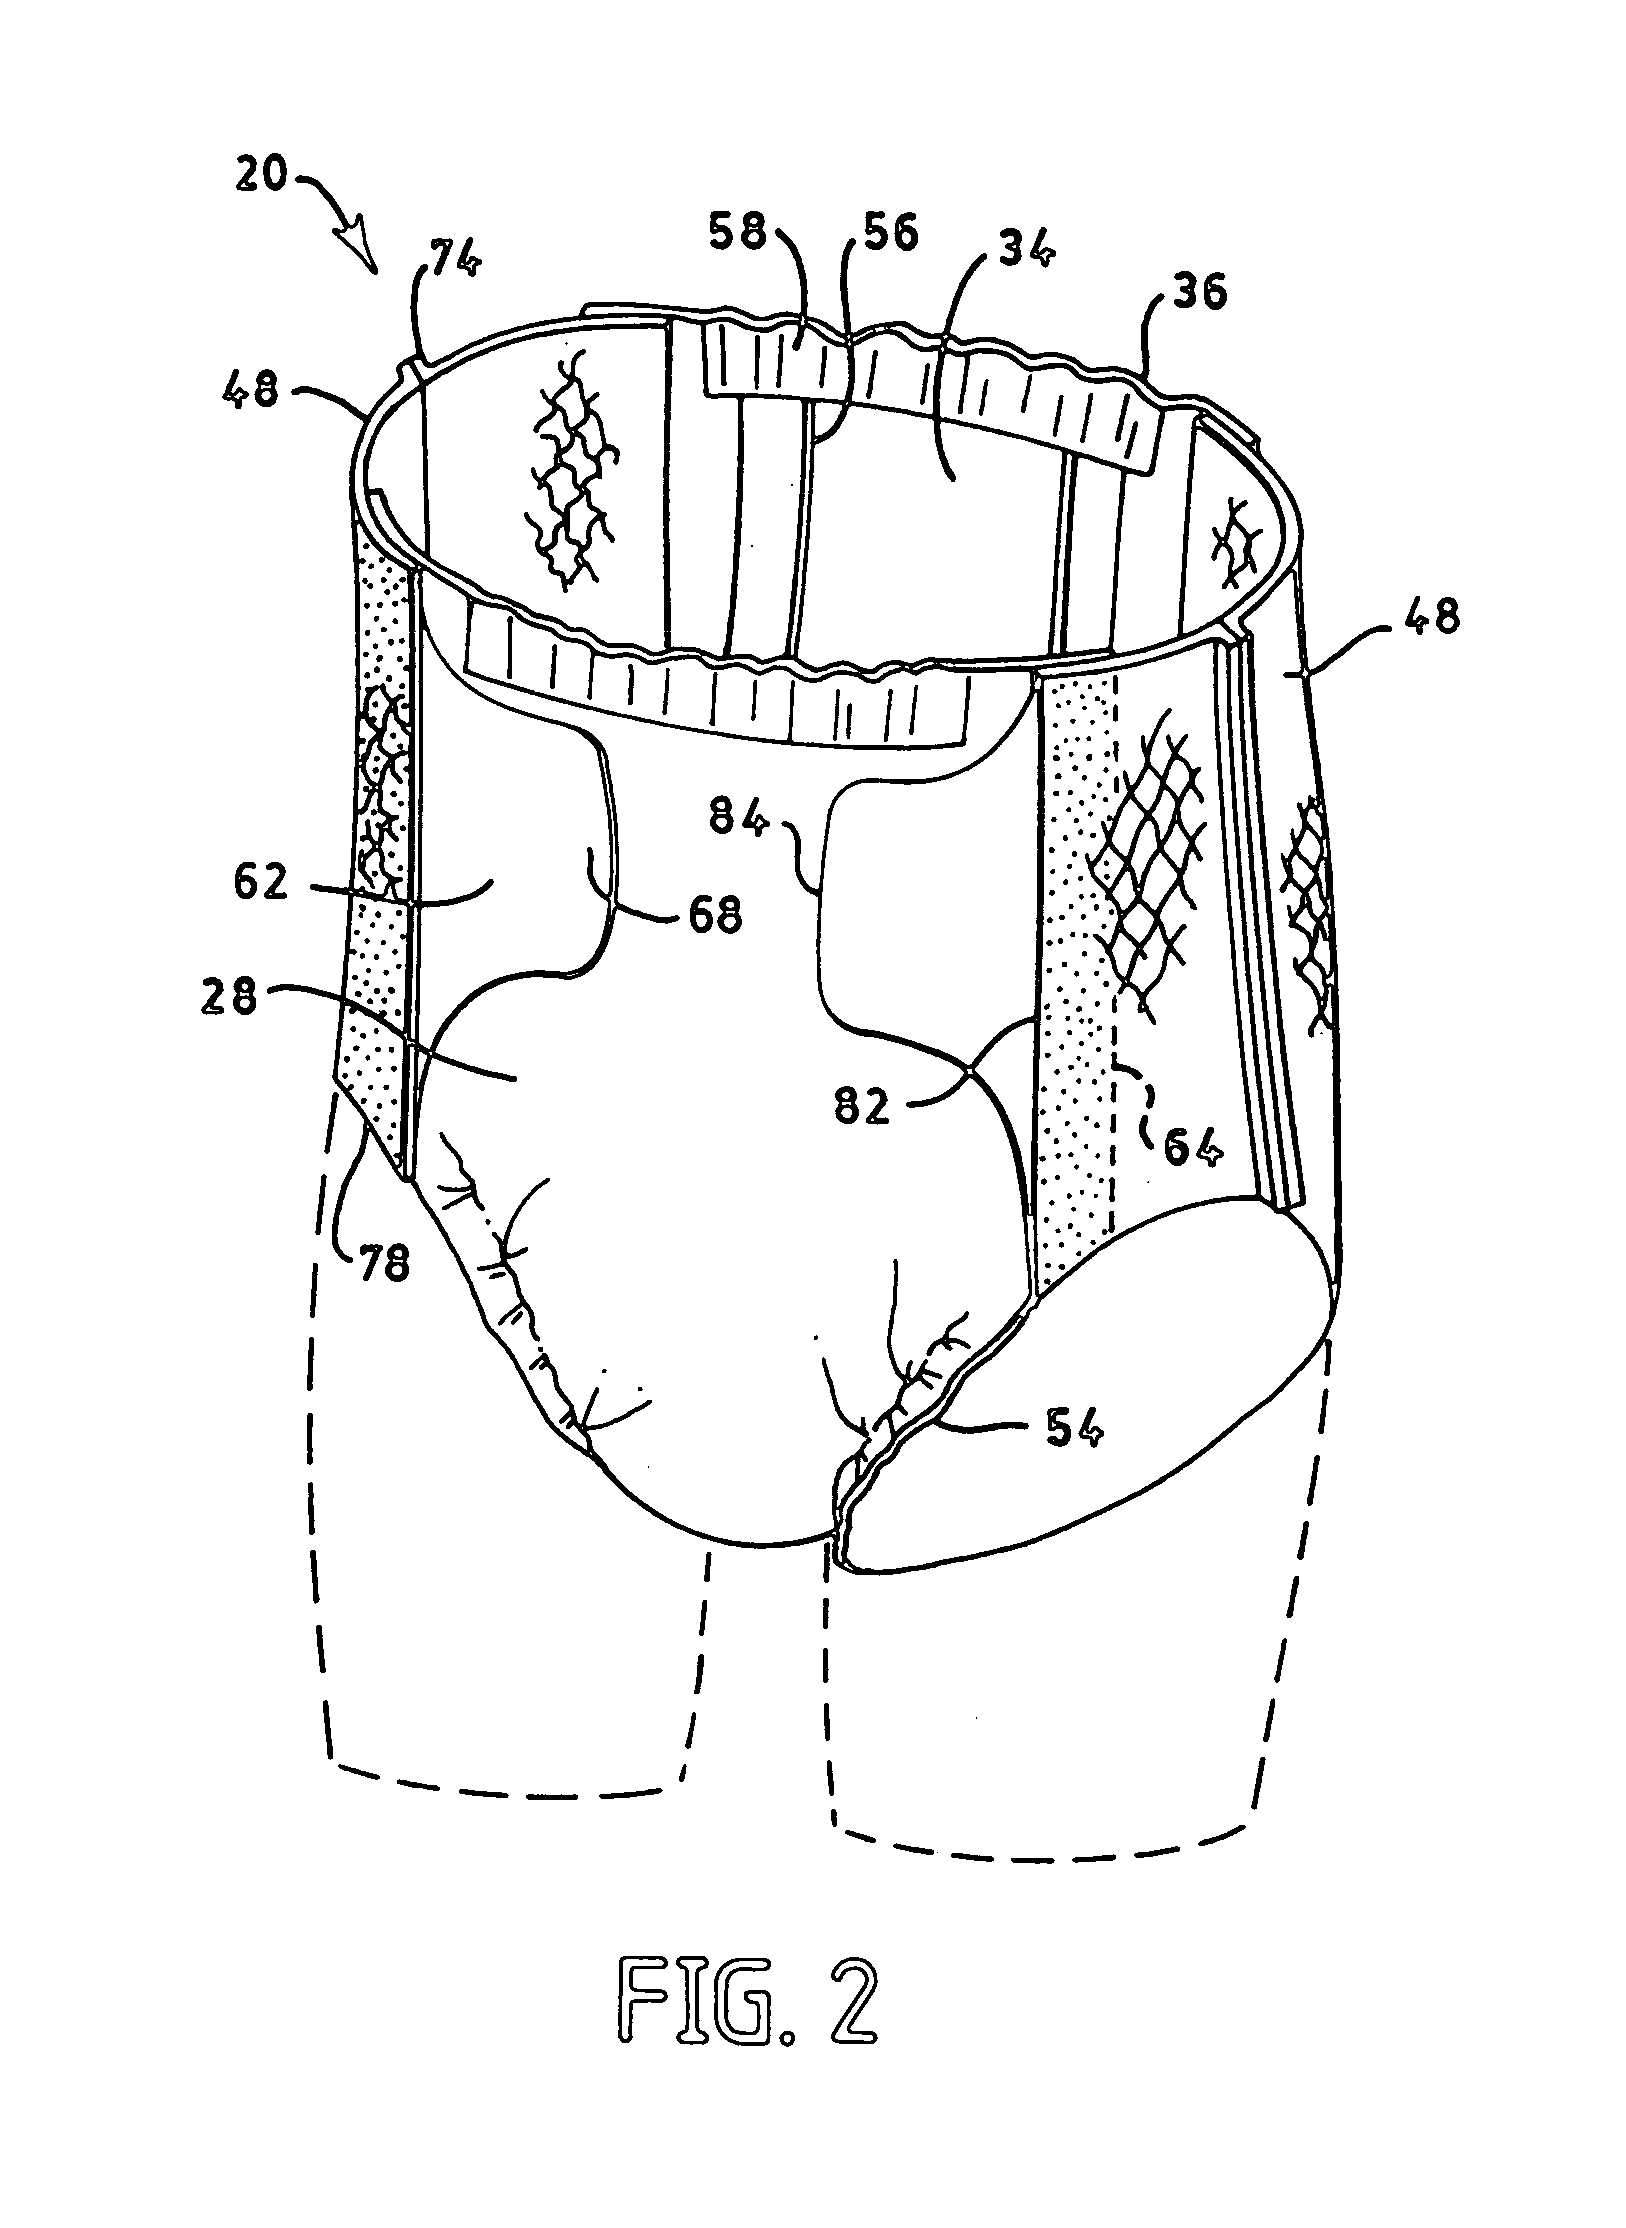 Pant-like disposable absorbent articles